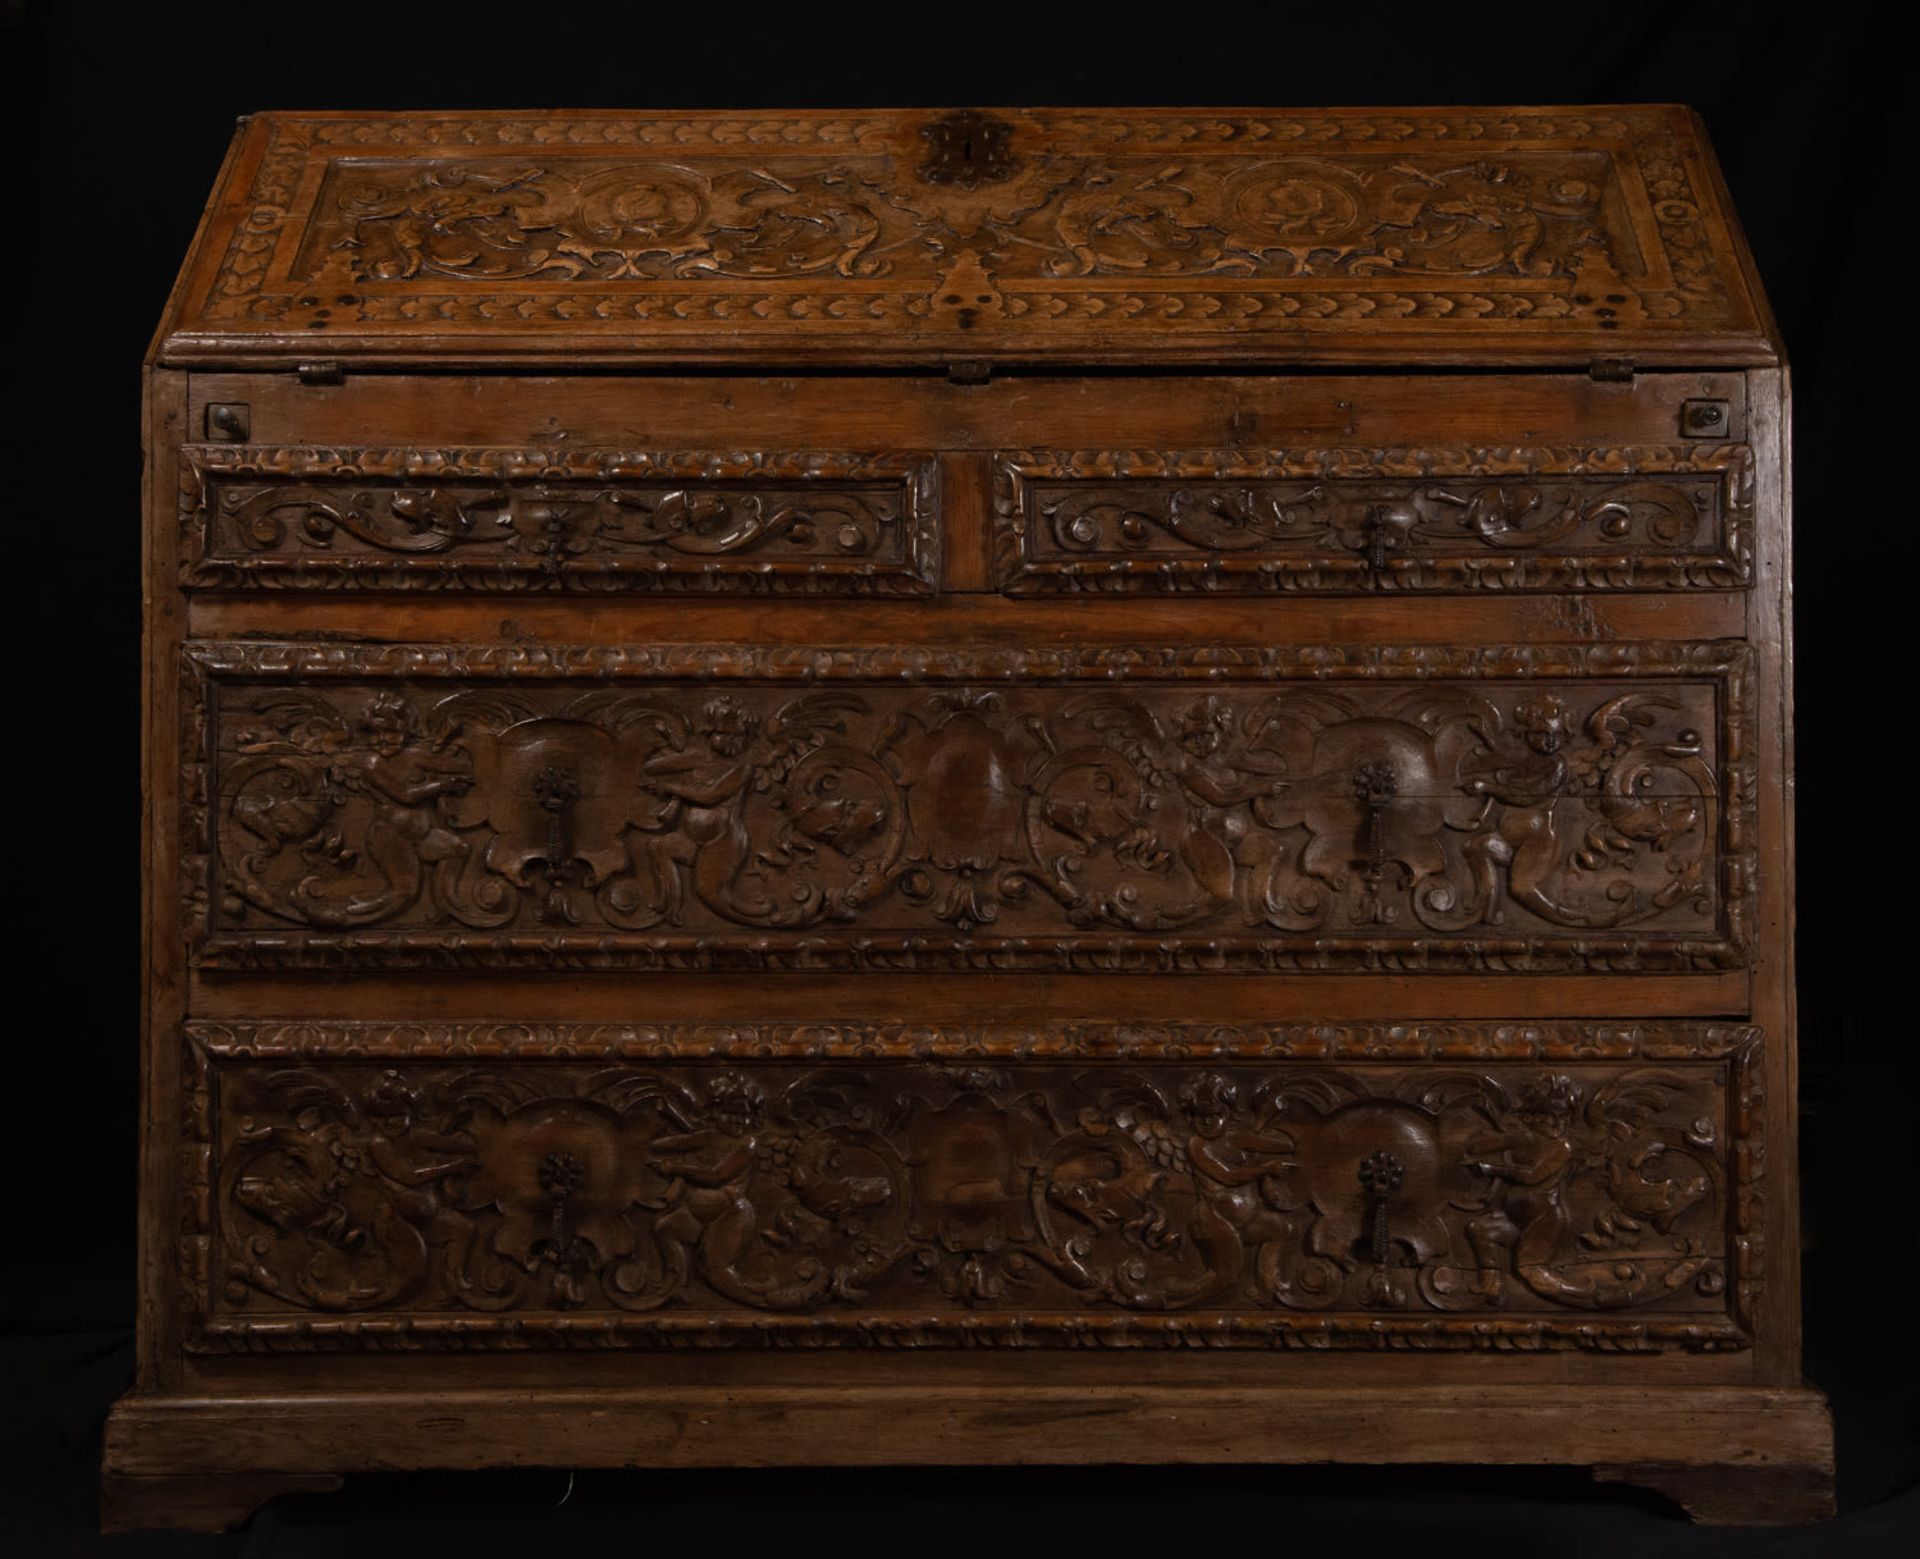 Exceptional Plateresque Desk Cabinet, Spanish Renaissance school of the 16th century - Image 2 of 9